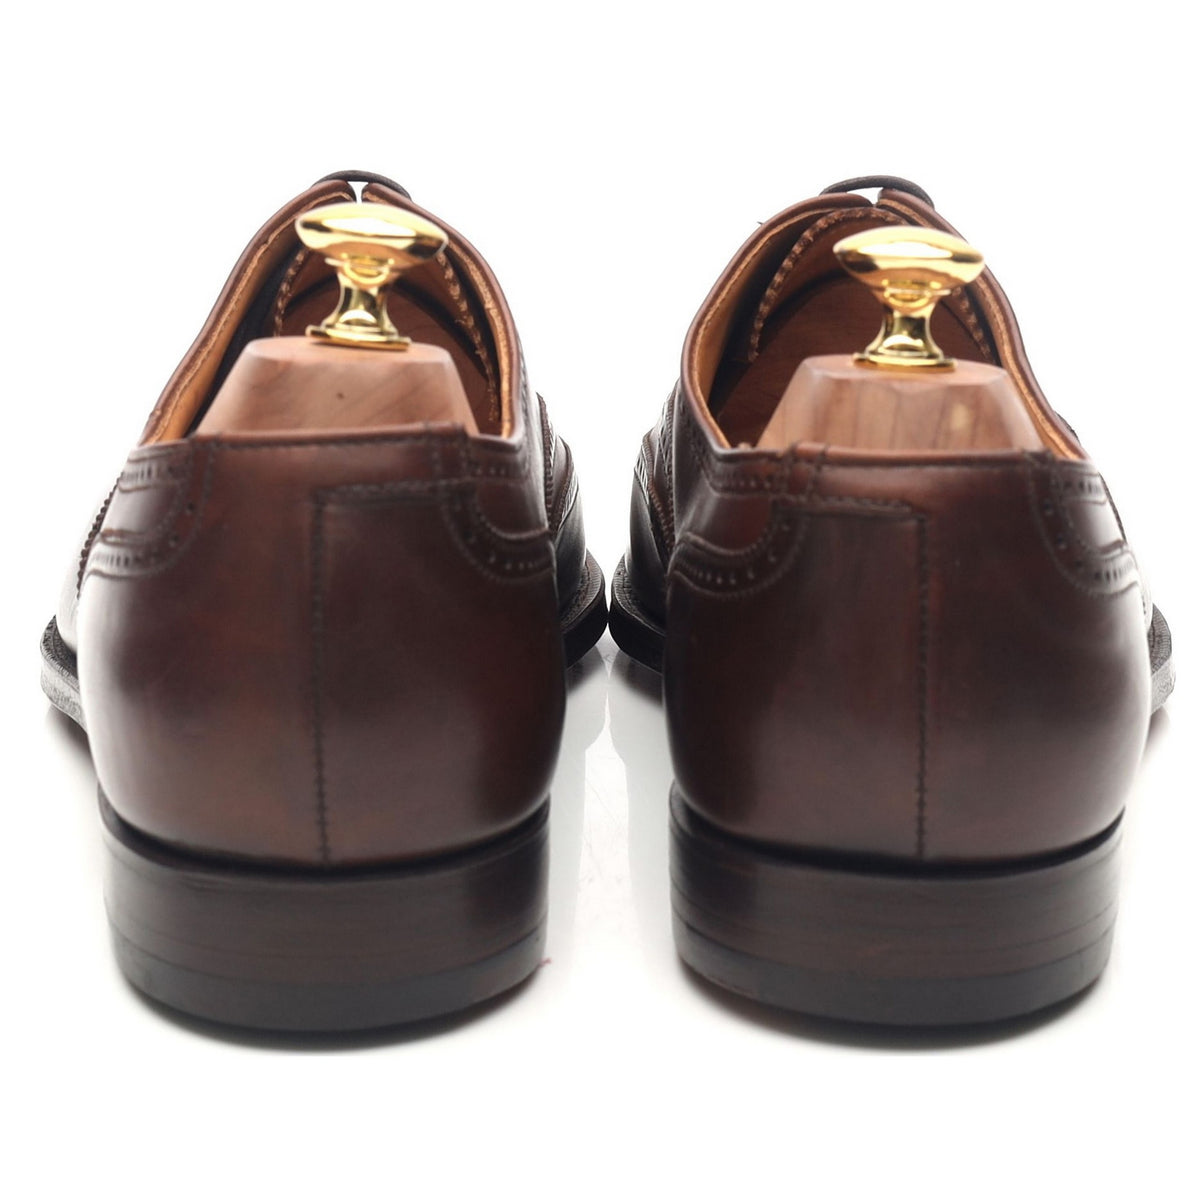 &#39;Drummond&#39; Dark Brown Leather Oxford Brogues UK 9 E